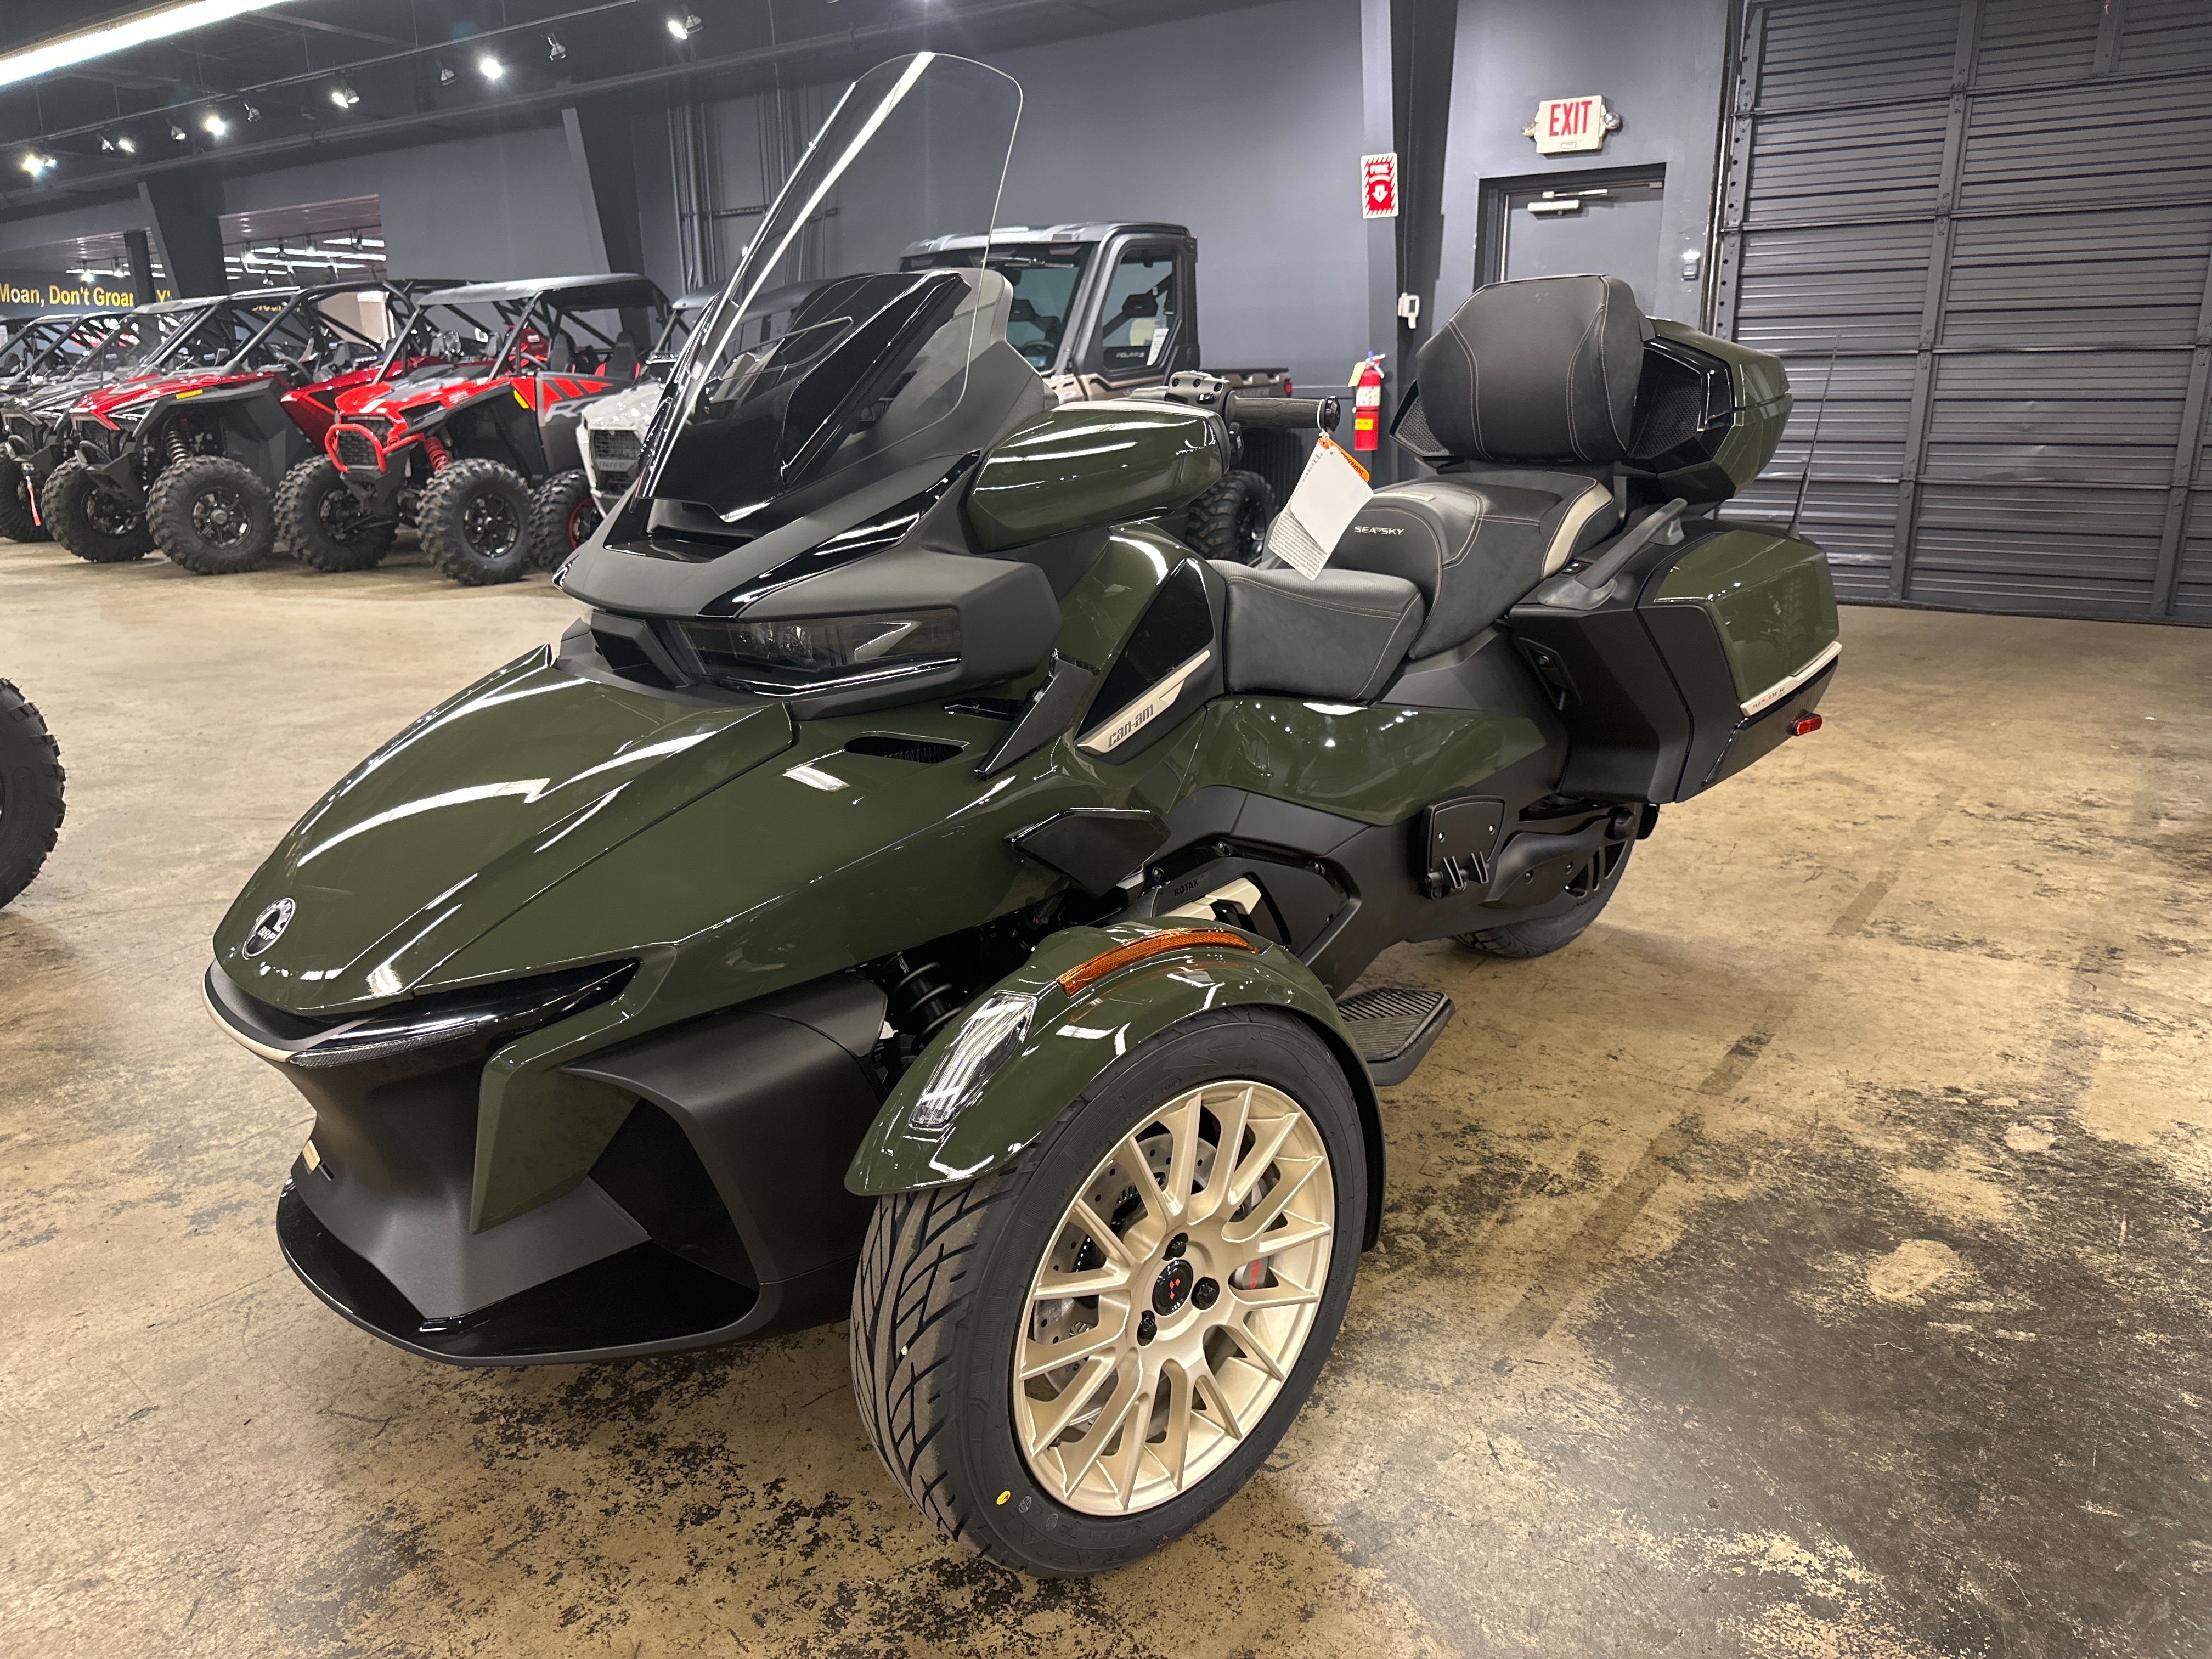 2023 Can-Am Spyder RT Limited at Sloans Motorcycle ATV, Murfreesboro, TN, 37129